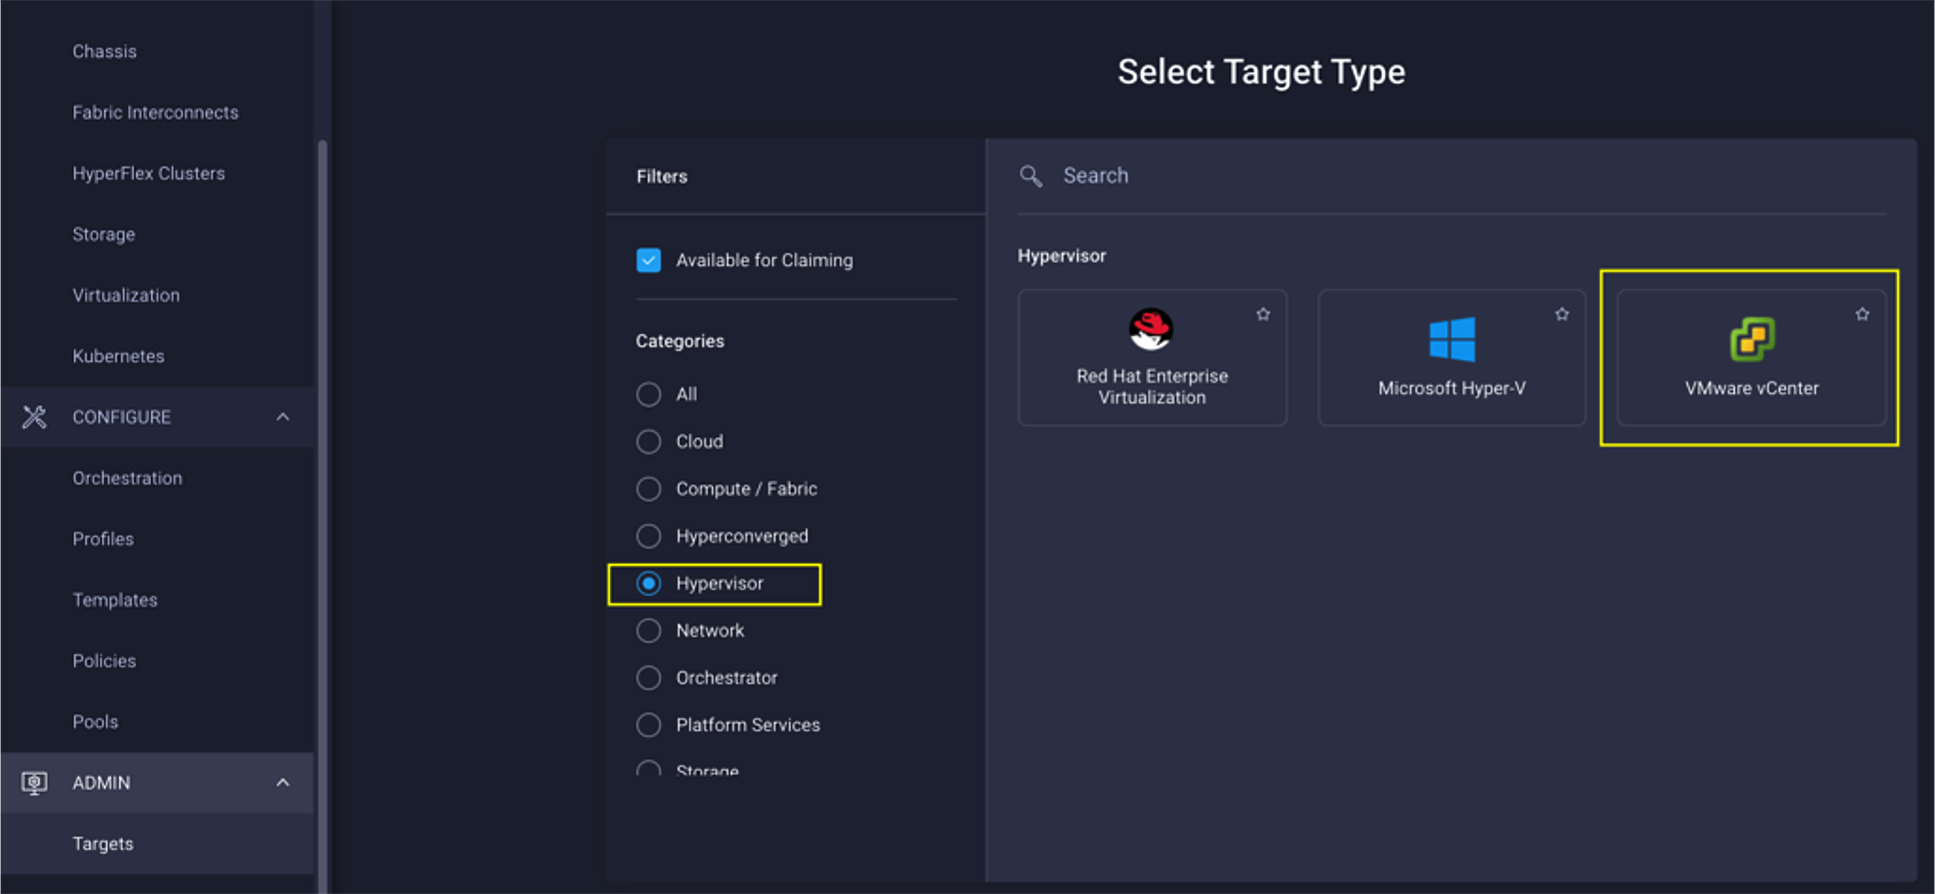 Claiming VMware vCenter in Cisco Intersight as a target